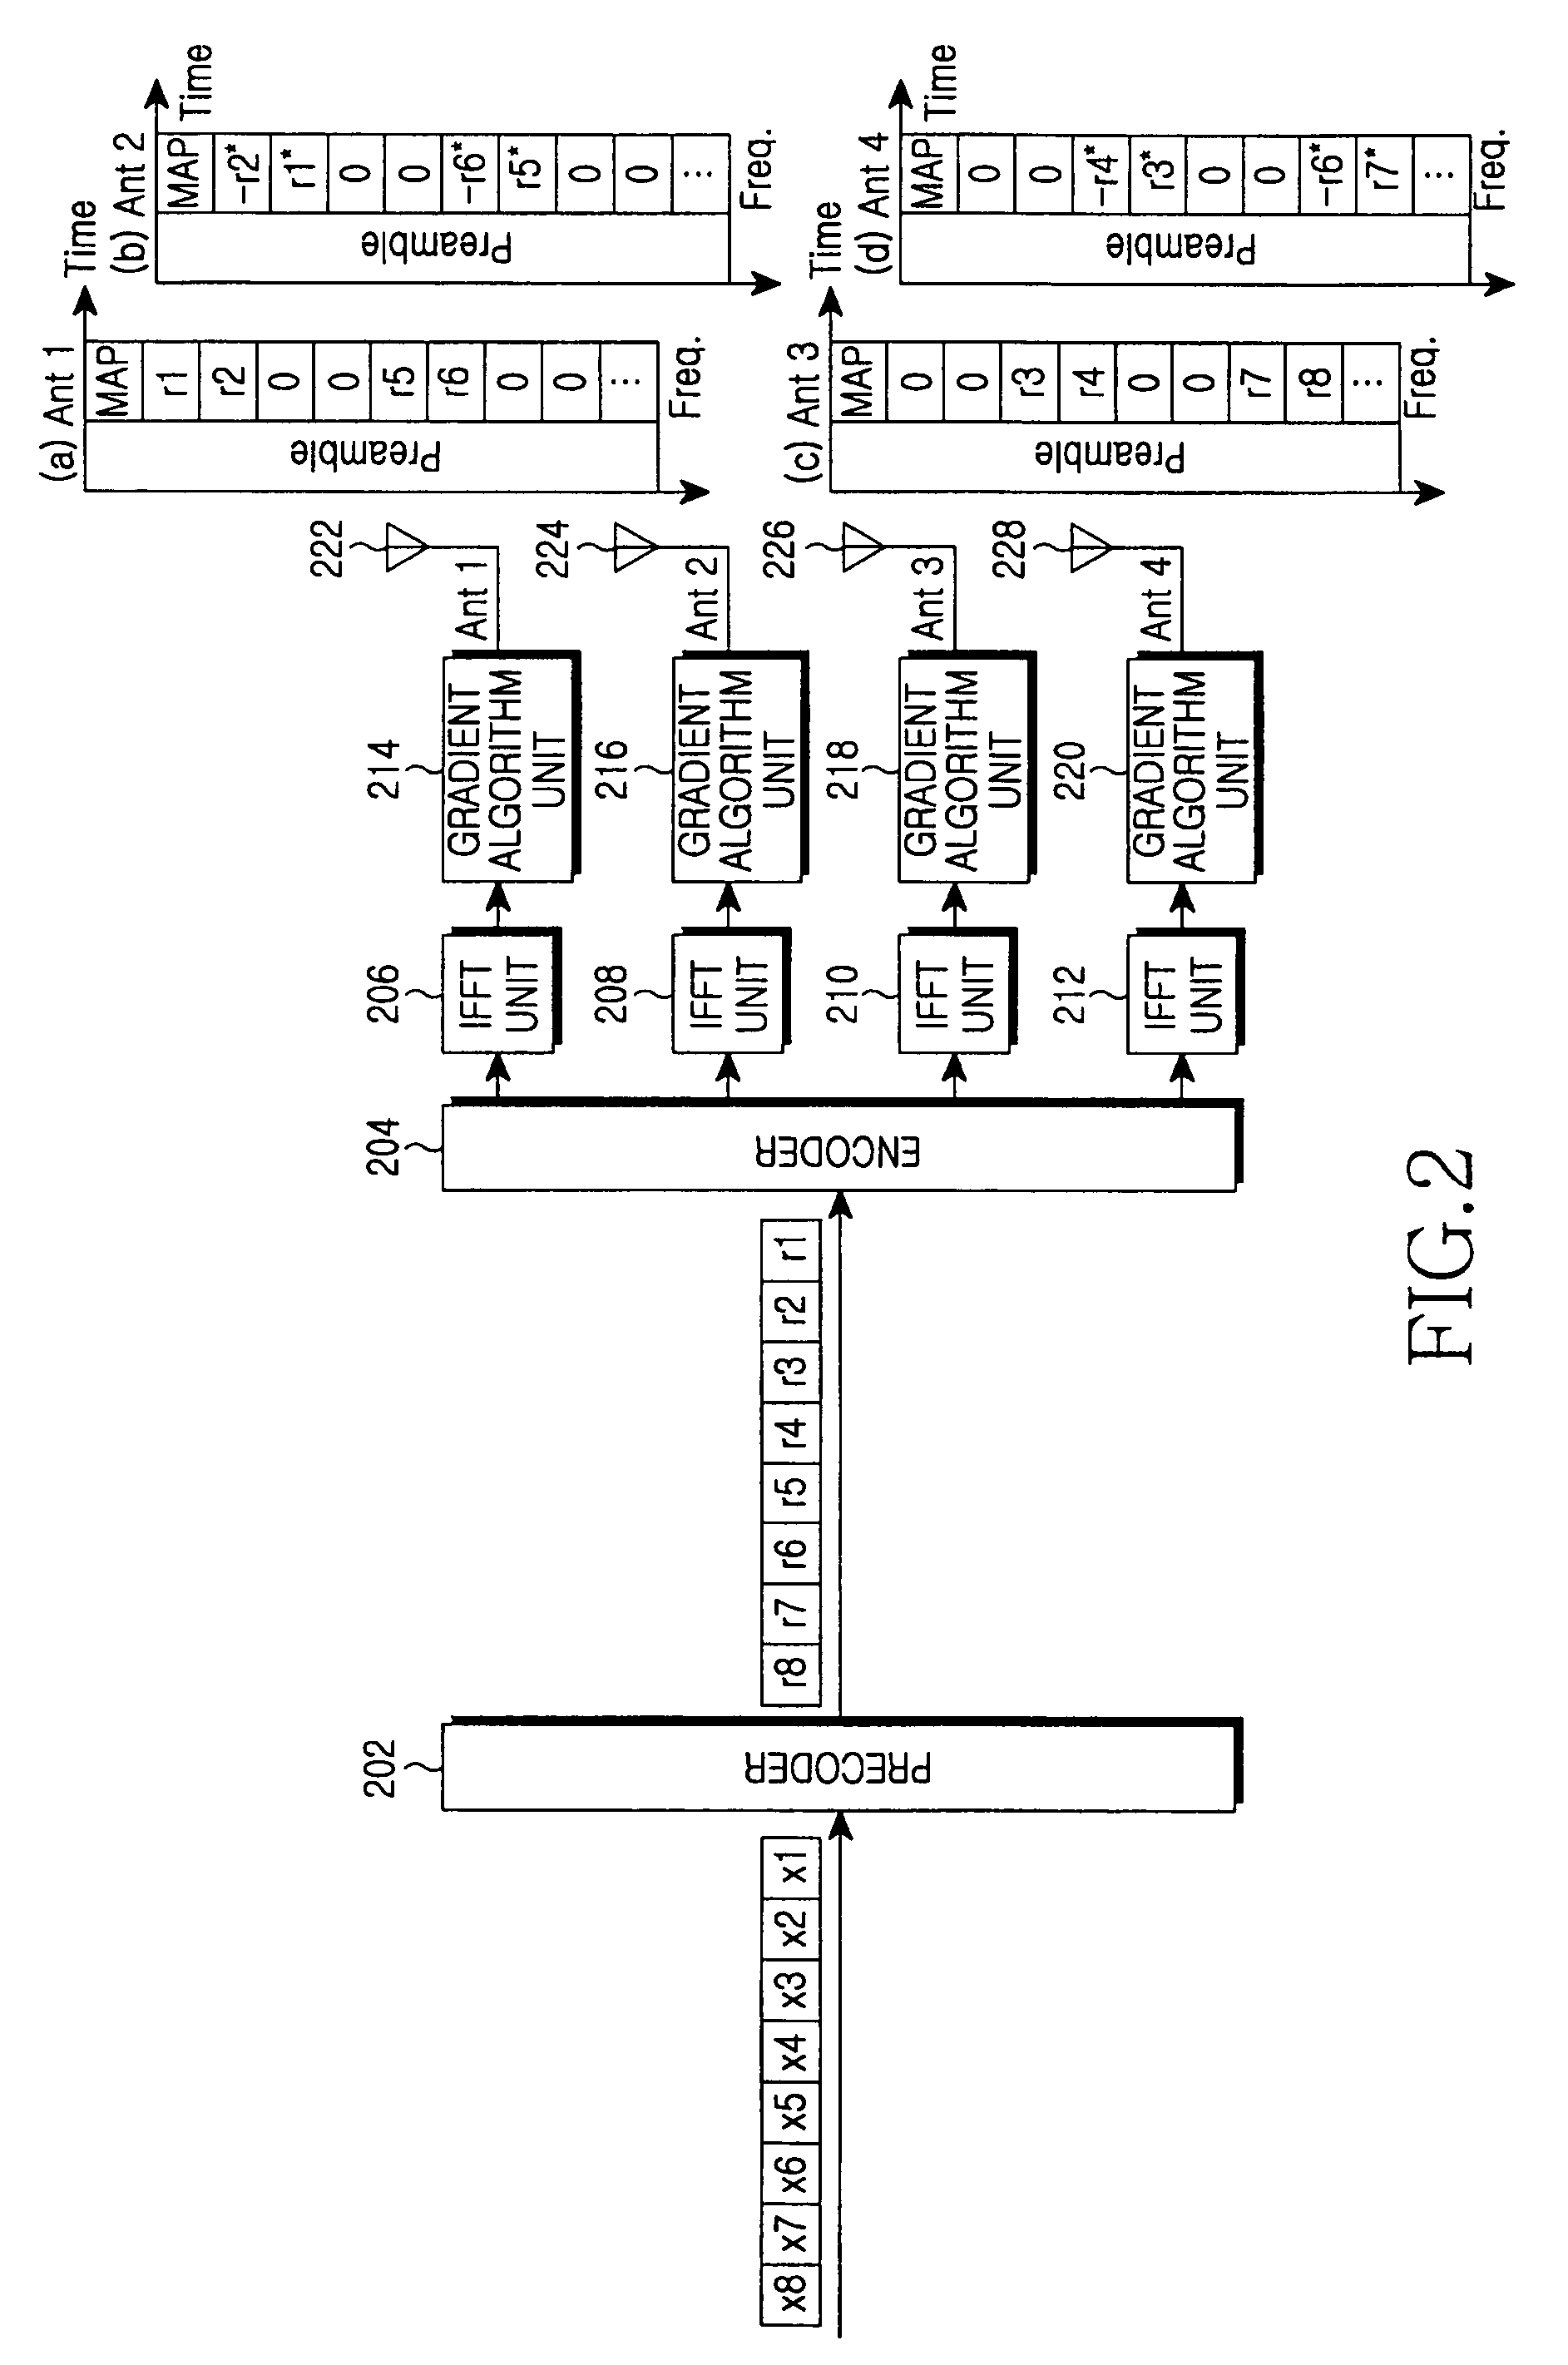 Apparatus and method for minimizing a PAPR in an OFDM communication system